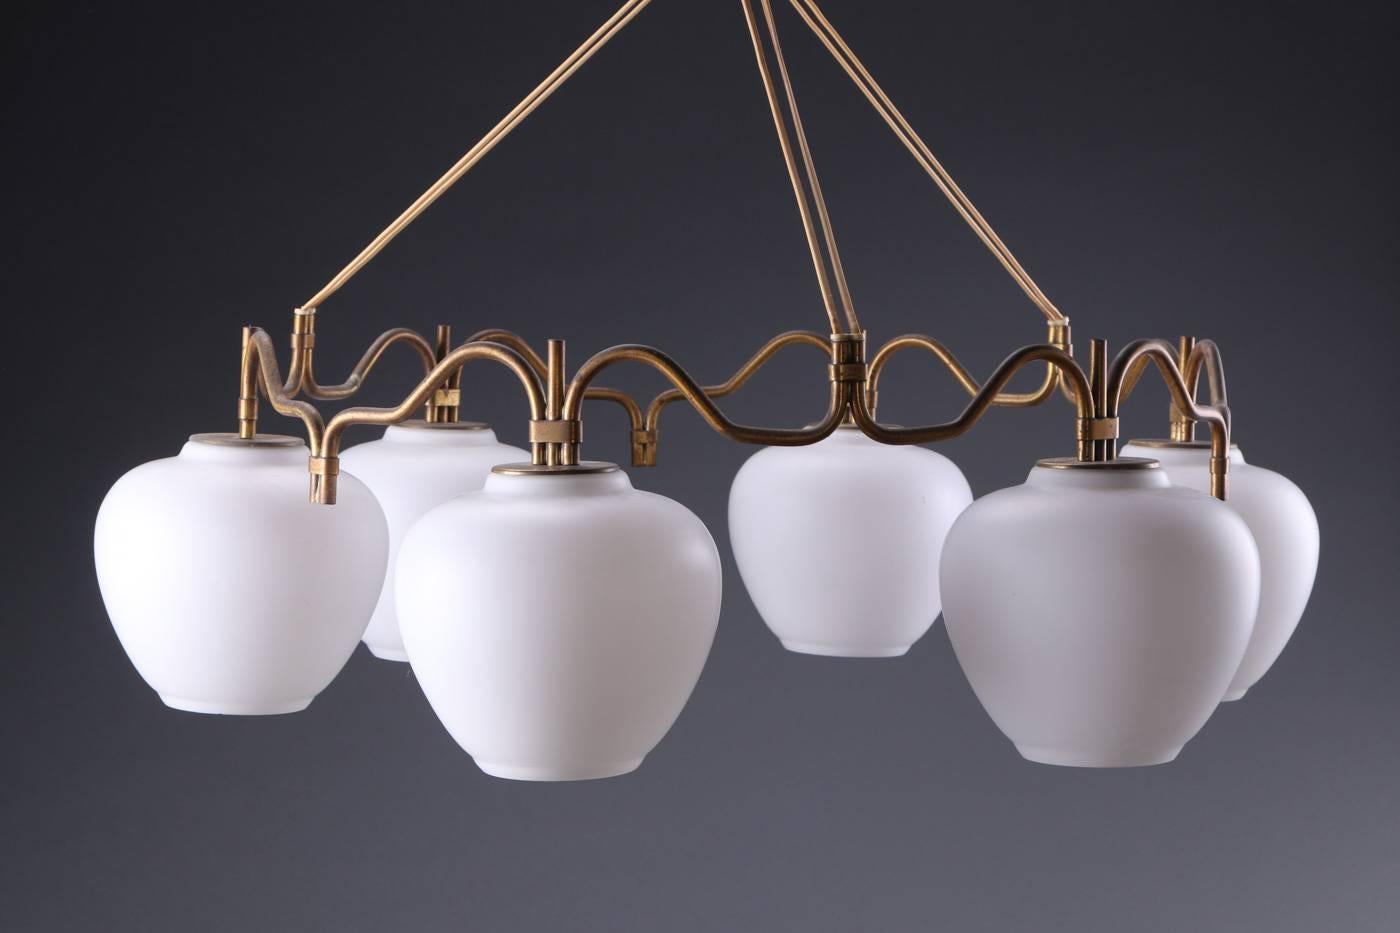 Brass construction with six opaline glass globes fitted with six E27 bulbs.
Designed by Bent Karlby for Lyfa in the 1950s in Denmark, model K 925.
Chandelier is suspended with vinyl cord from an original patinated brass canopy.